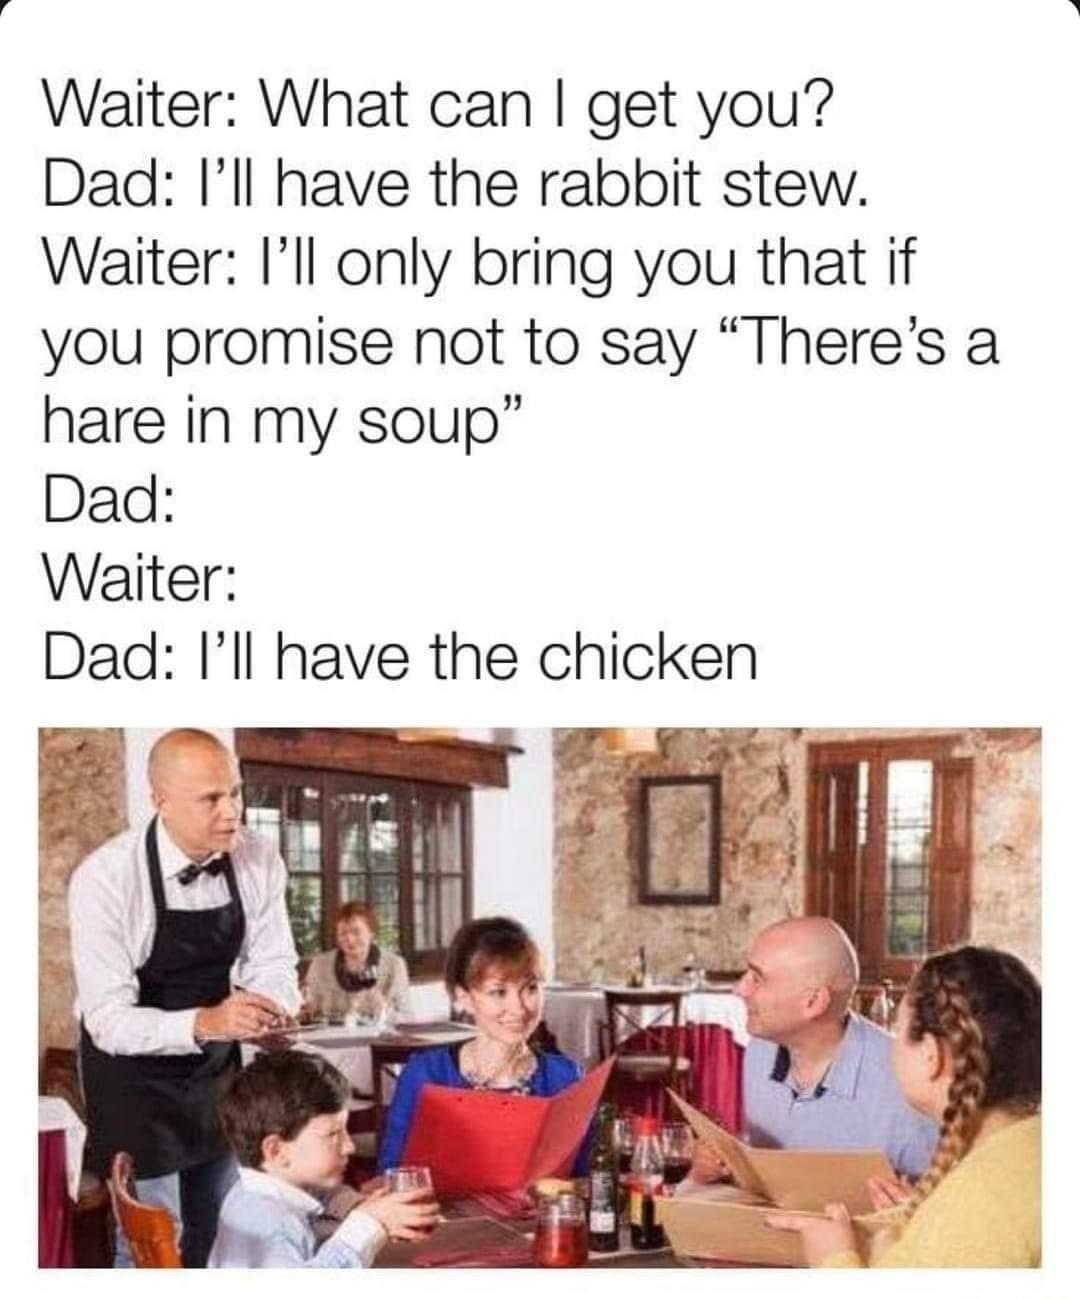 fresh memes - funny memes - dad joke hare in my soup - Waiter What can I get you? Dad I'll have the rabbit stew. Waiter I'll only bring you that if you promise not to say There's a hare in my soup" Dad Waiter Dad I'll have the chicken